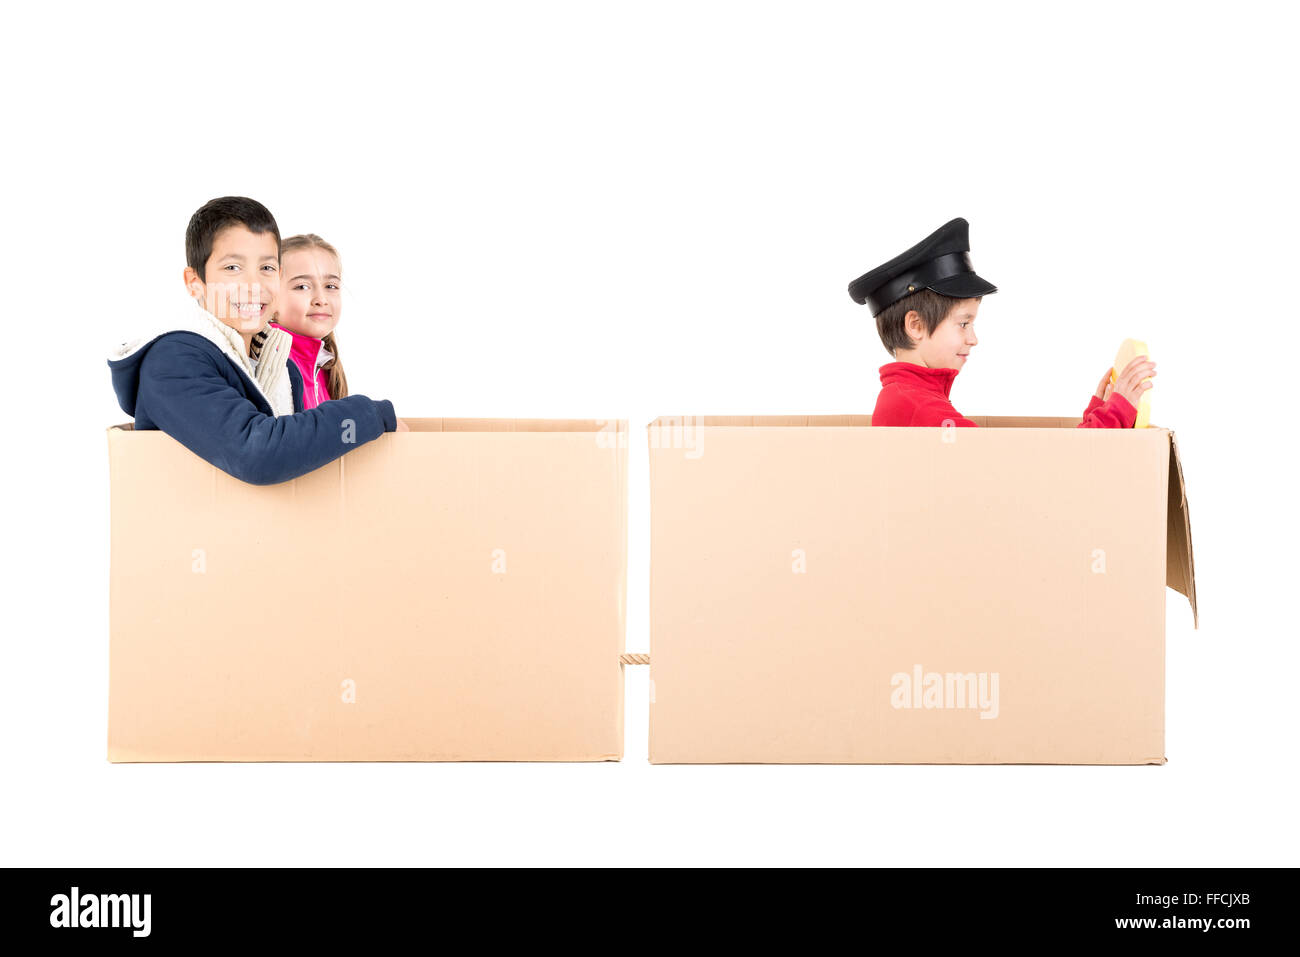 Children playing VIP people in a cardboard box limousine Stock Photo